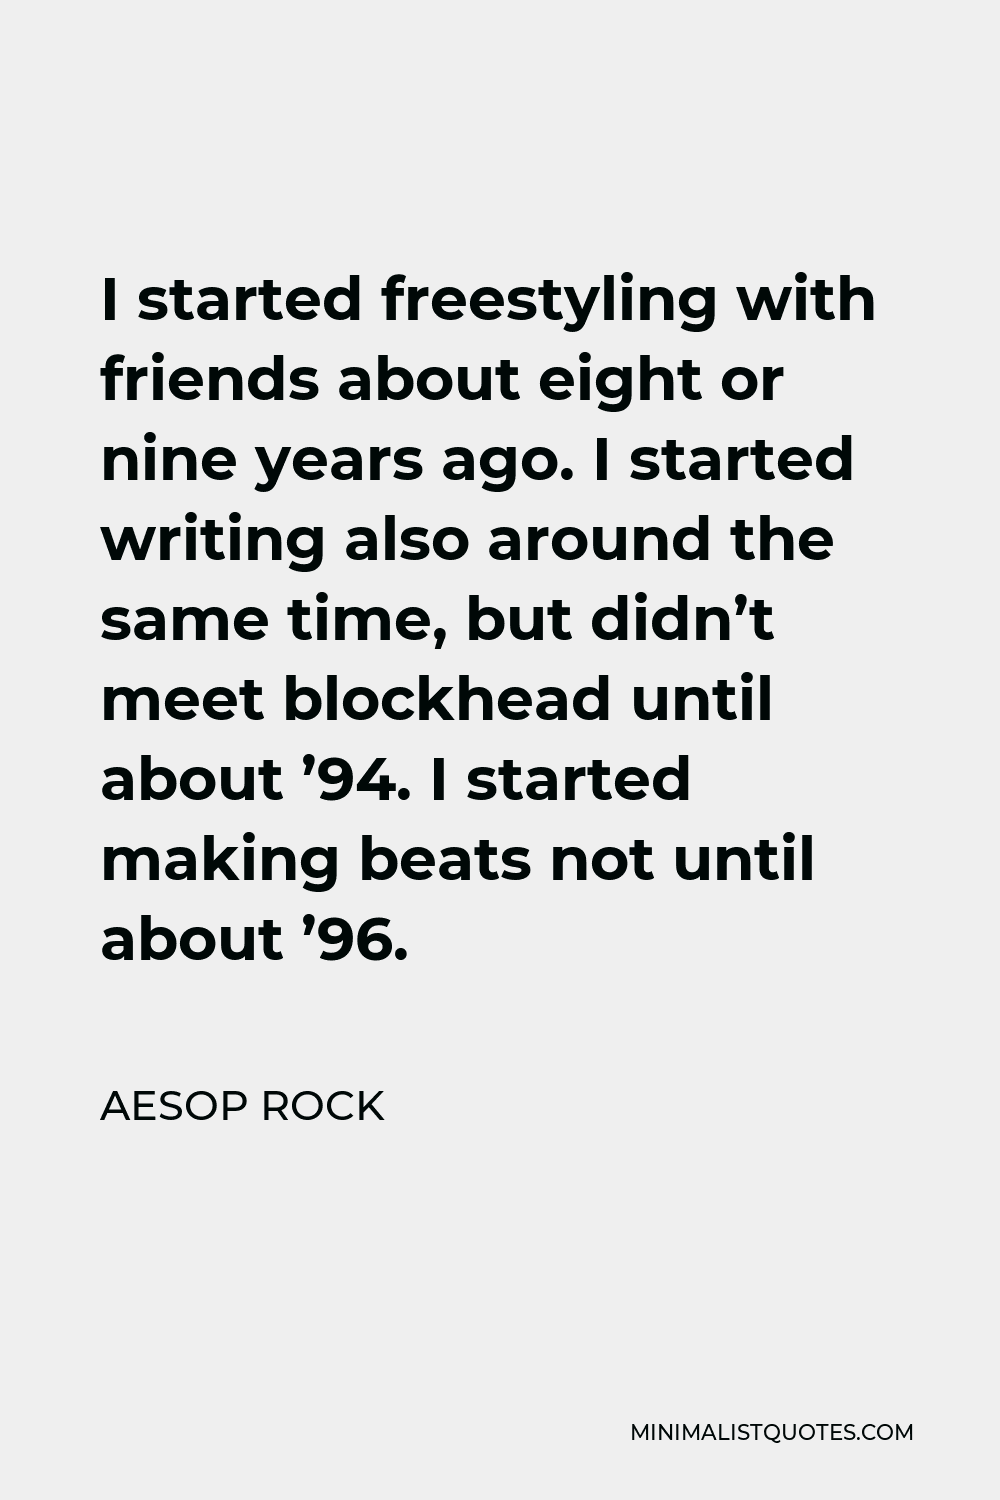 Aesop Rock Quote - I started freestyling with friends about eight or nine years ago. I started writing also around the same time, but didn’t meet blockhead until about ’94. I started making beats not until about ’96.